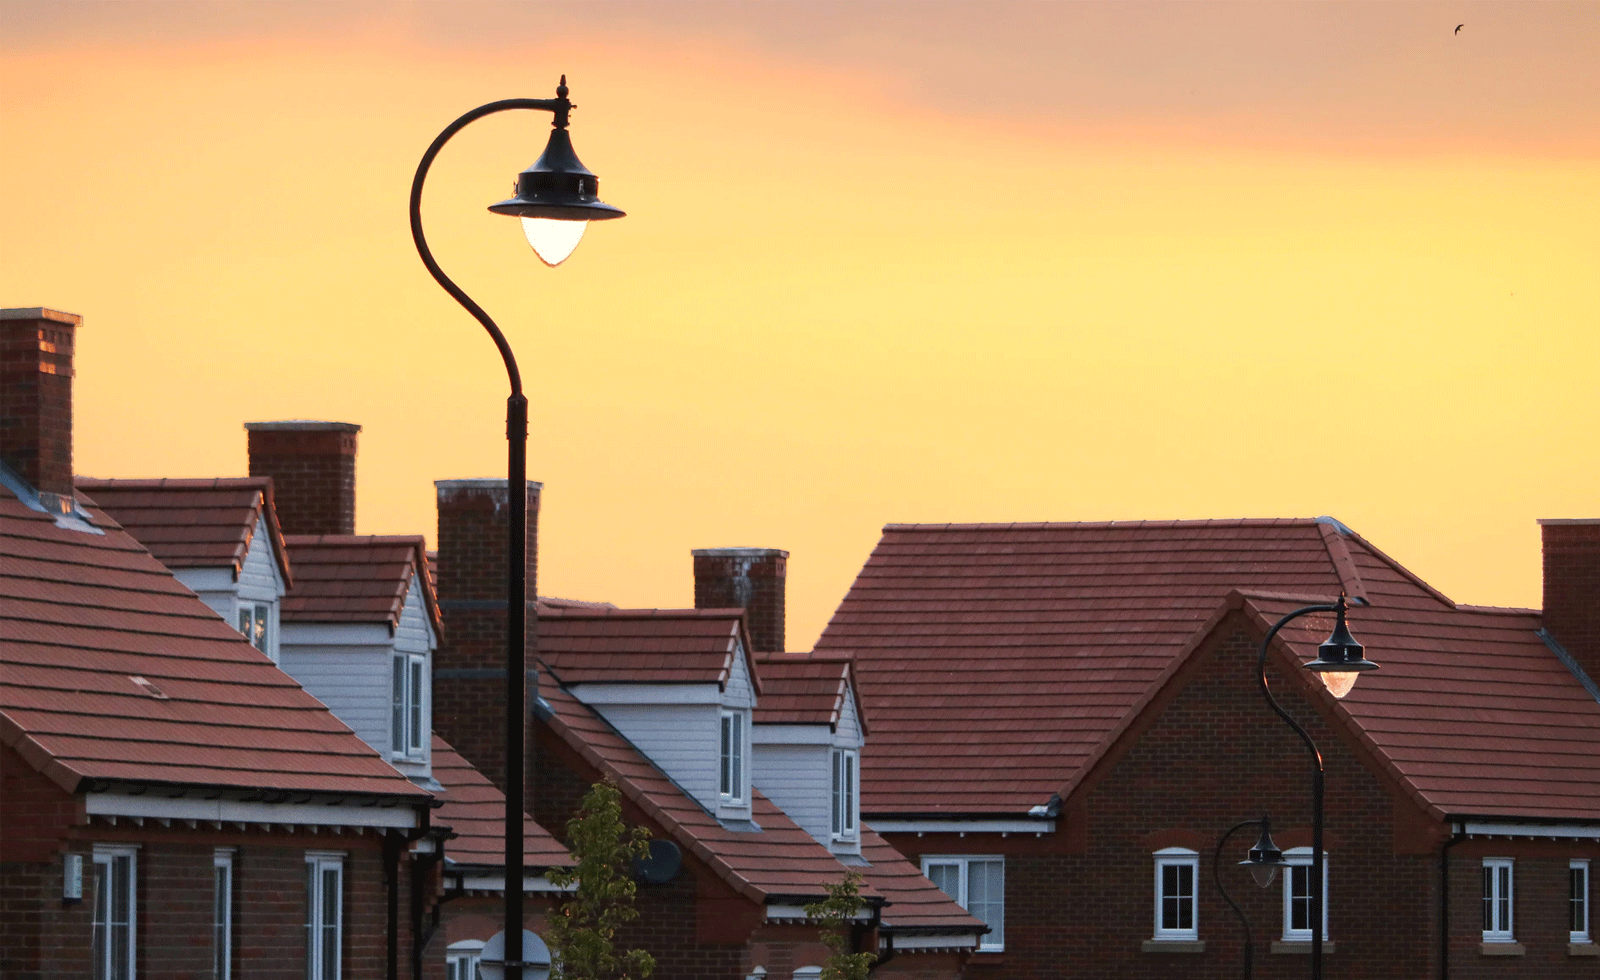 Houses in sunset